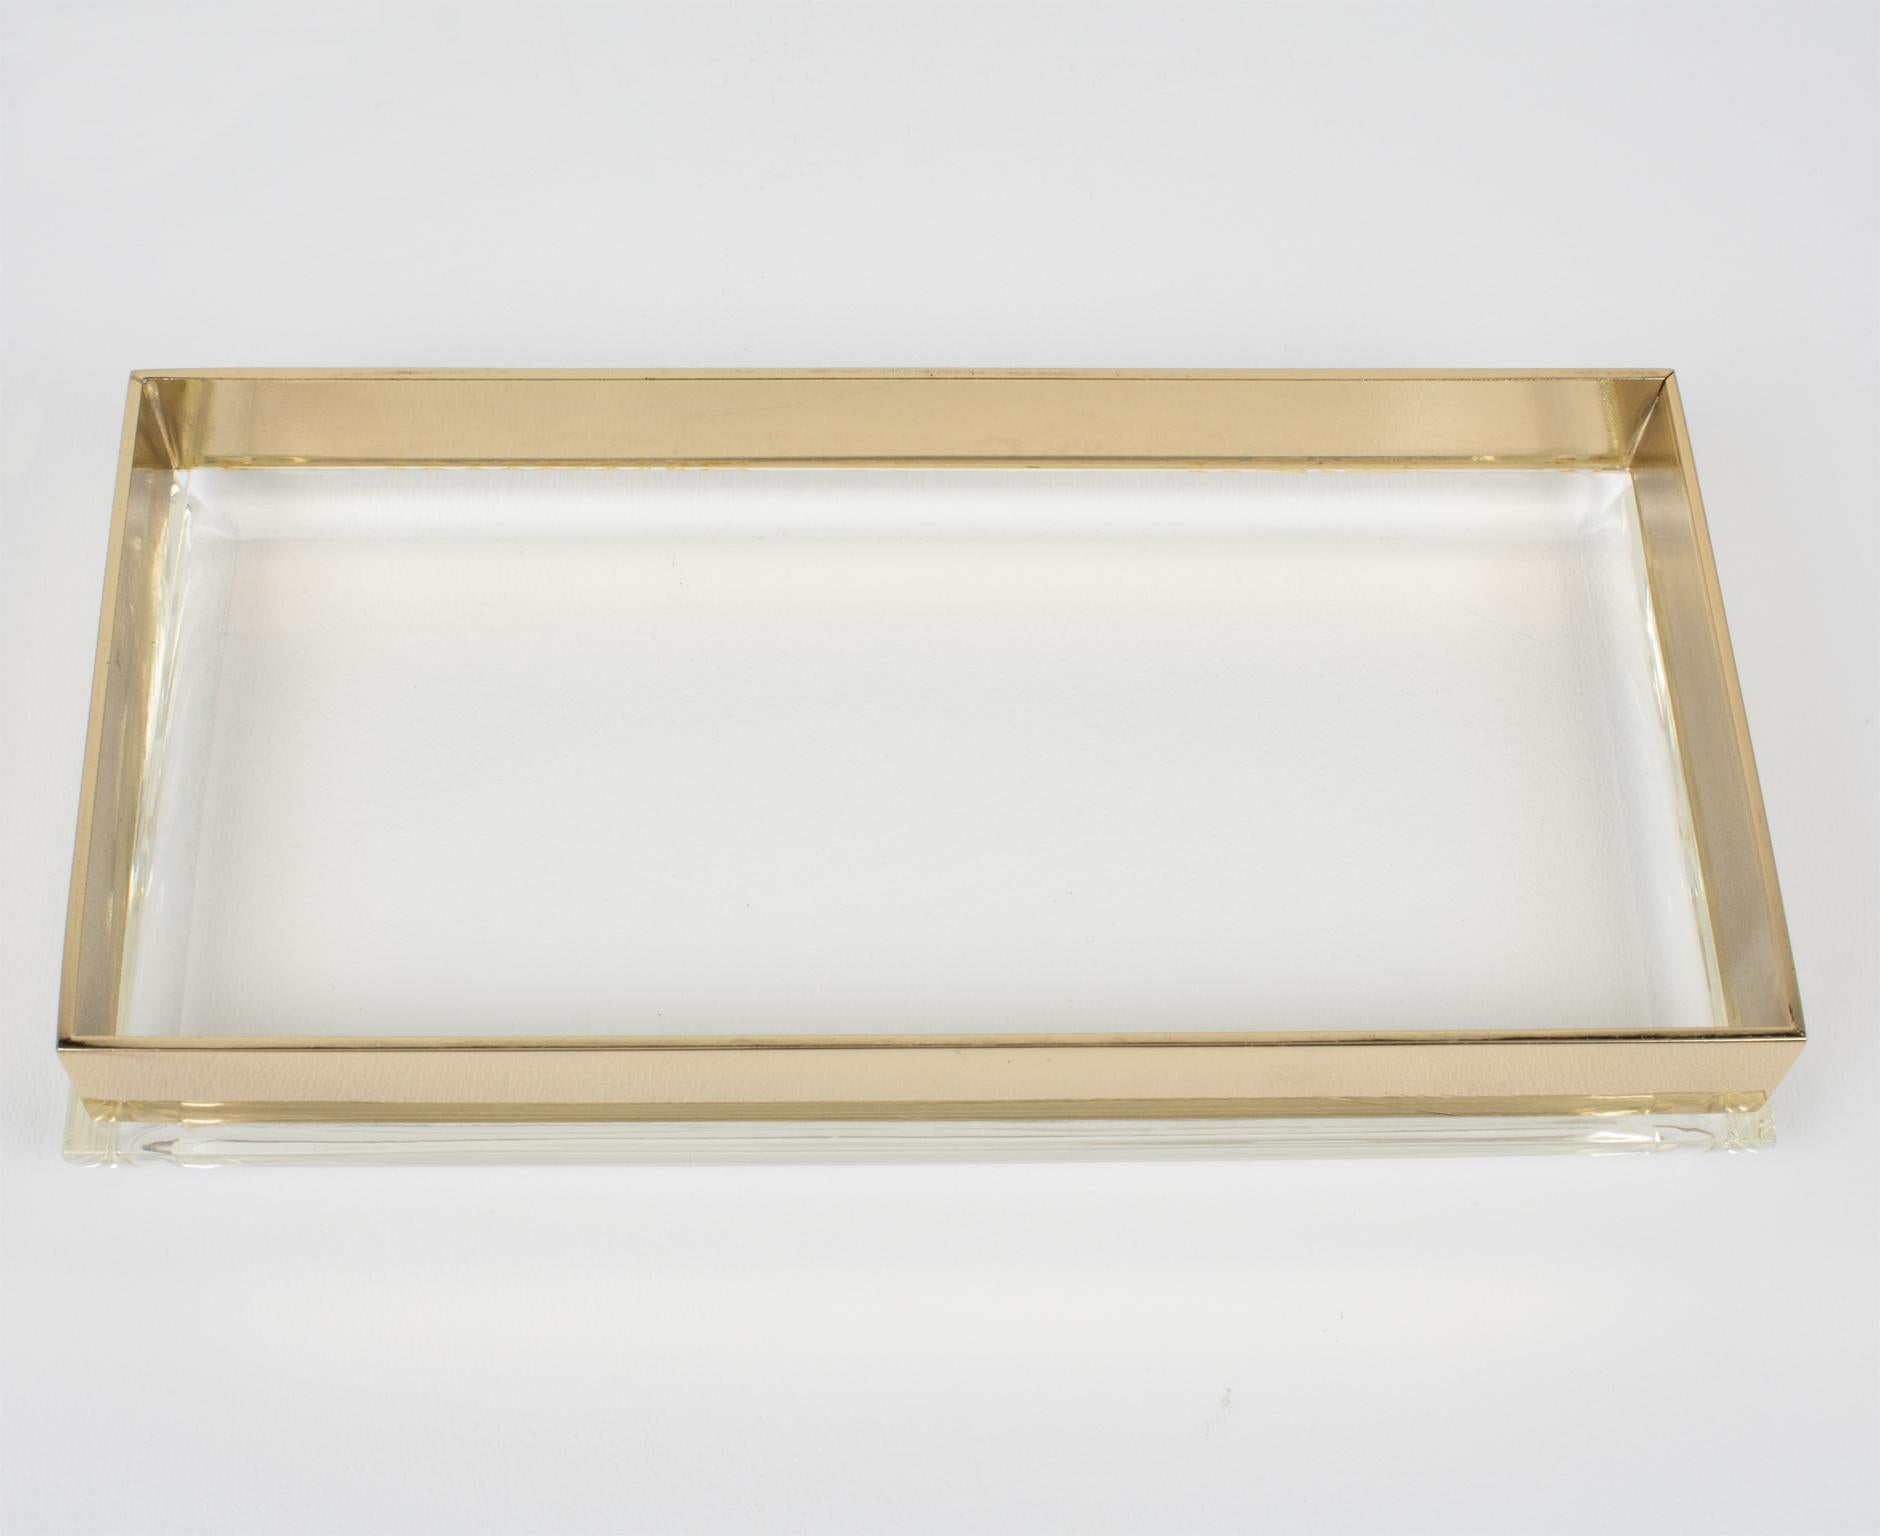 Philippe Cheverny Style Geometric Lucite and Gilded Metal Box, France 1970s For Sale 1